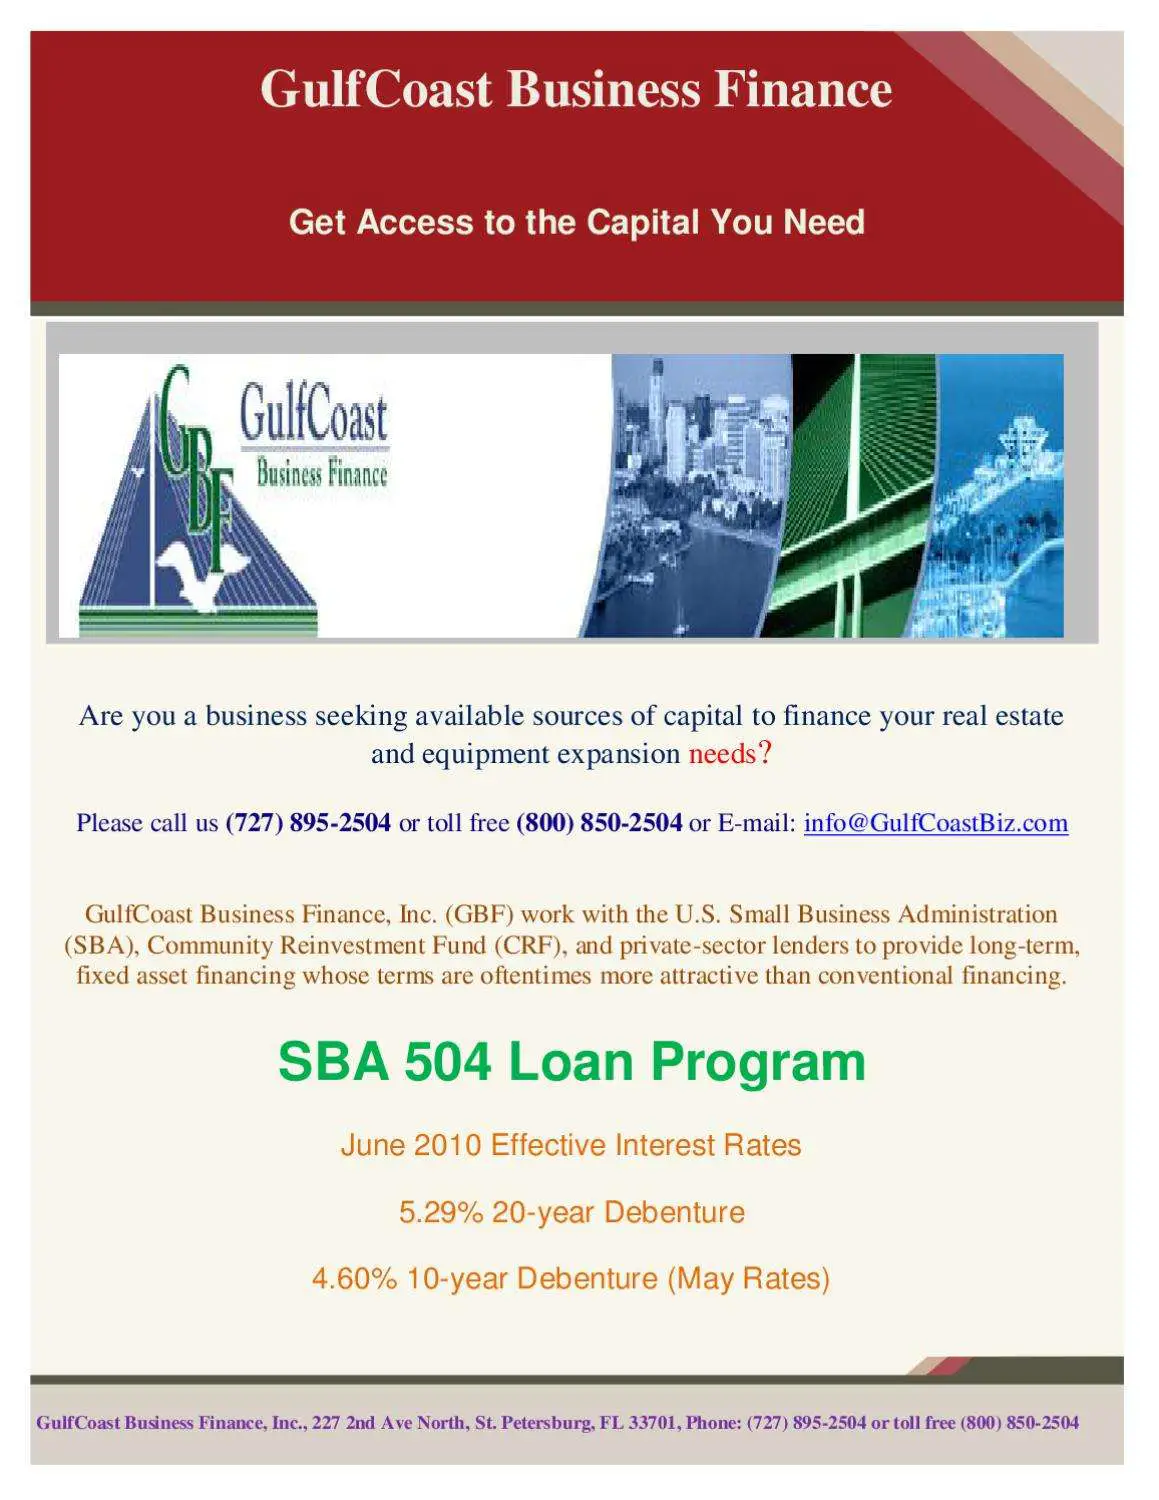 SBA Loan Program for Small Businesses by Sandra Anderson ...